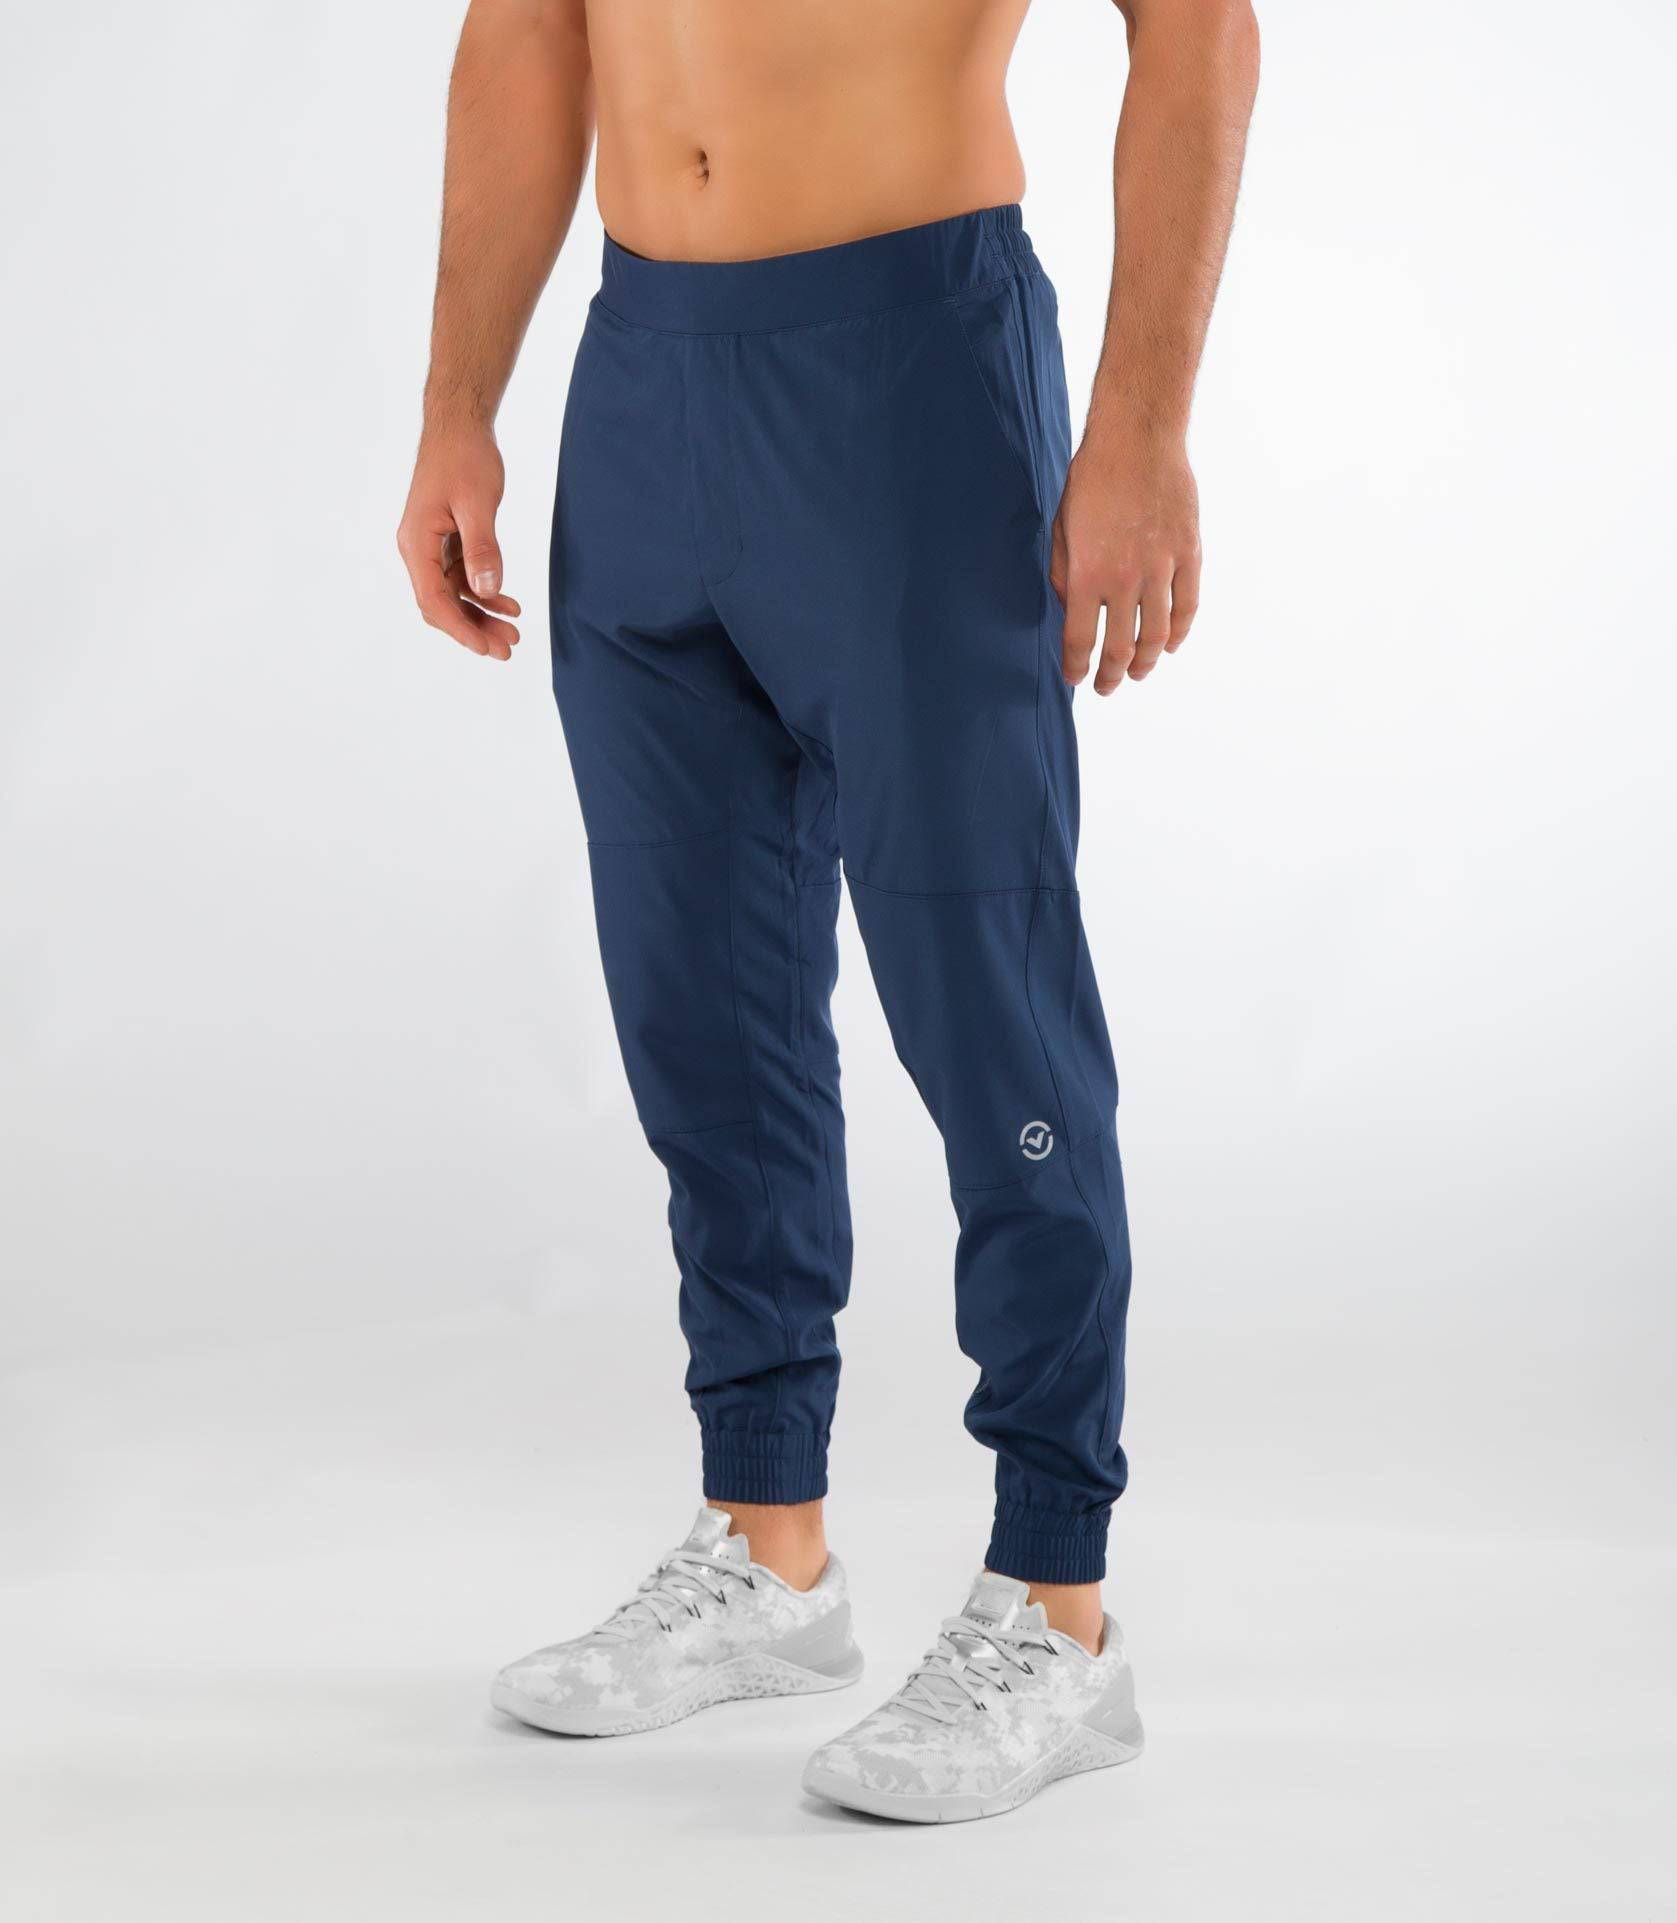 Virus | ST7 Triwire Fitted Pant - XTC Fitness - Exercise Equipment Superstore - Canada - Pants